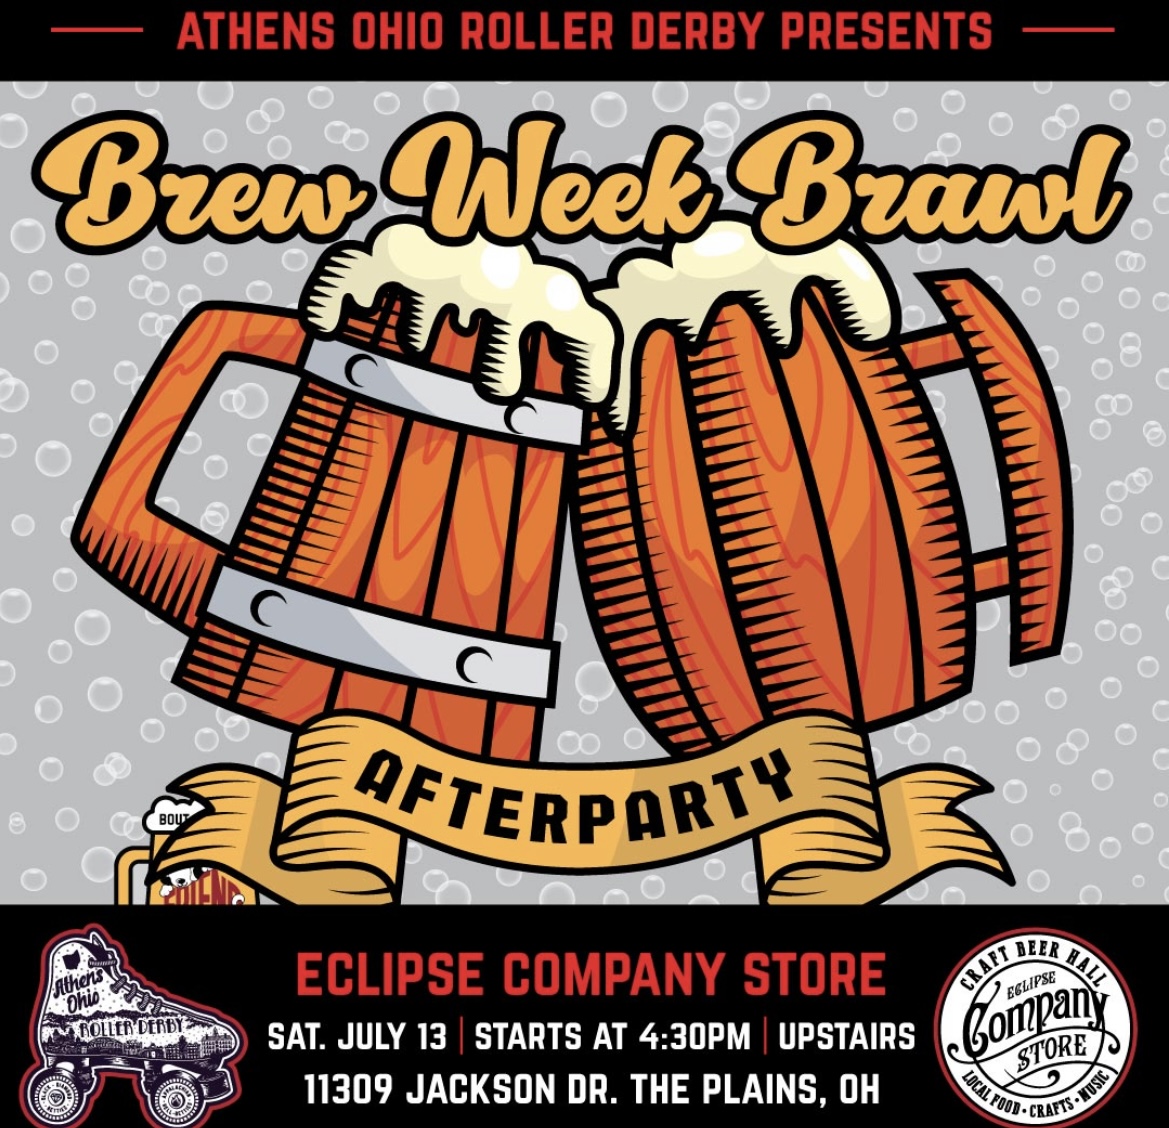 A flyer for the Brew Week Brawl afterparty at the Eclipse Company Store.